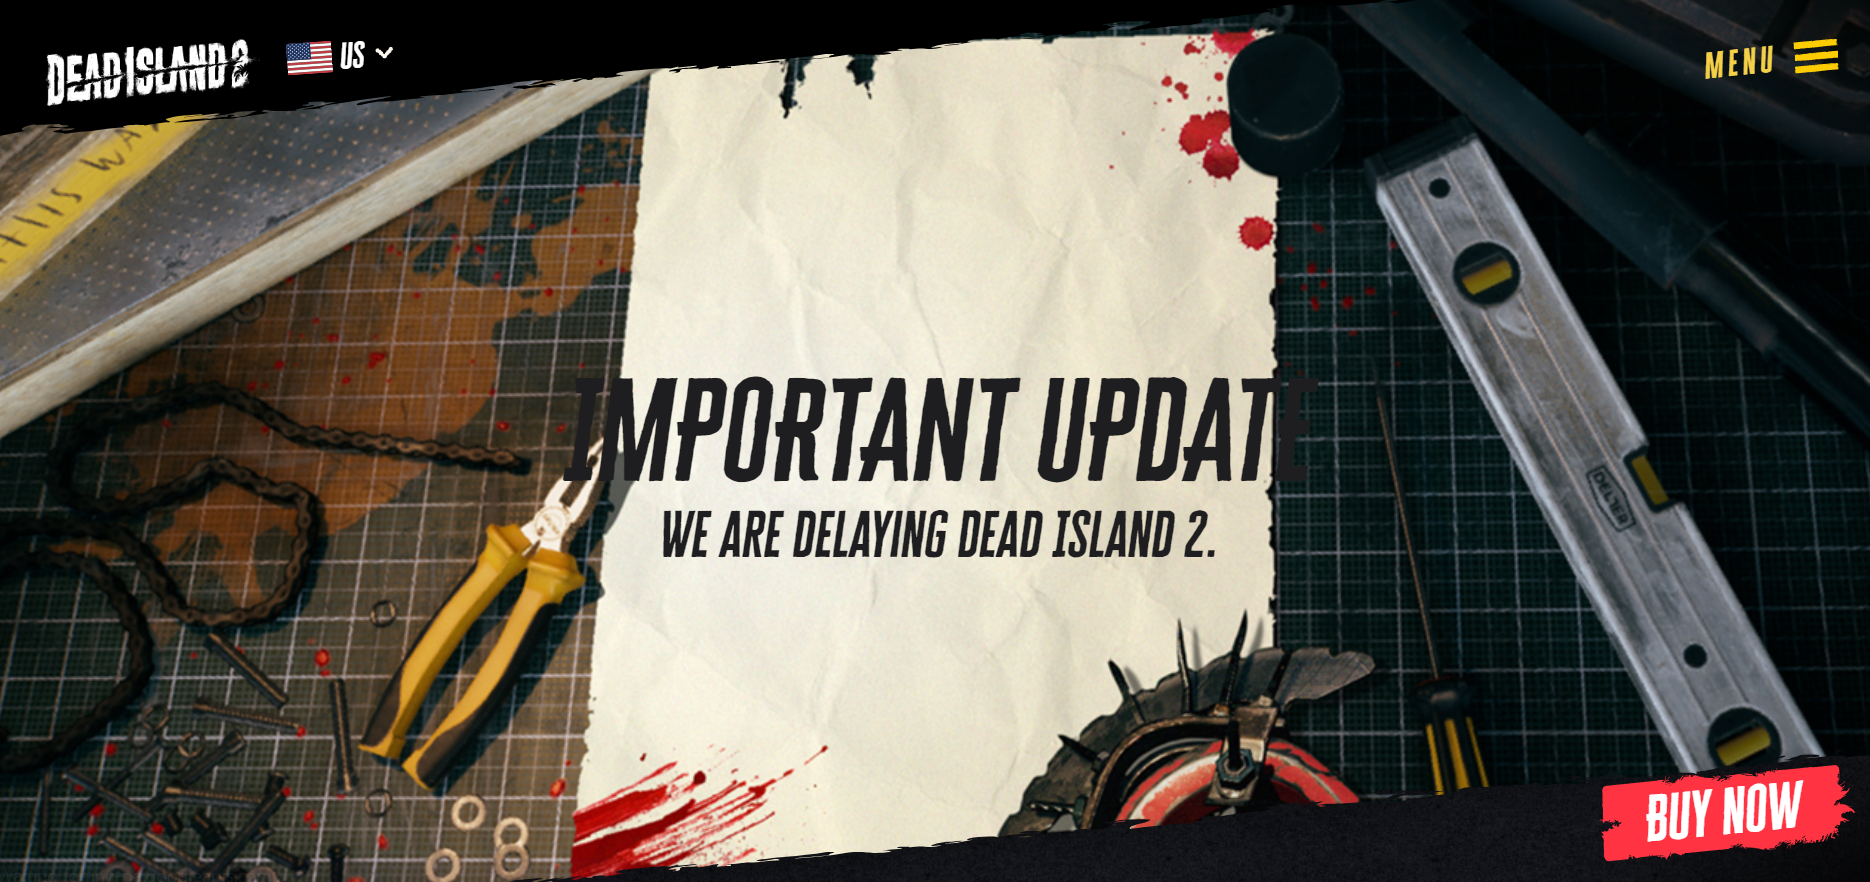 Update Dead Island 2 from the official website.